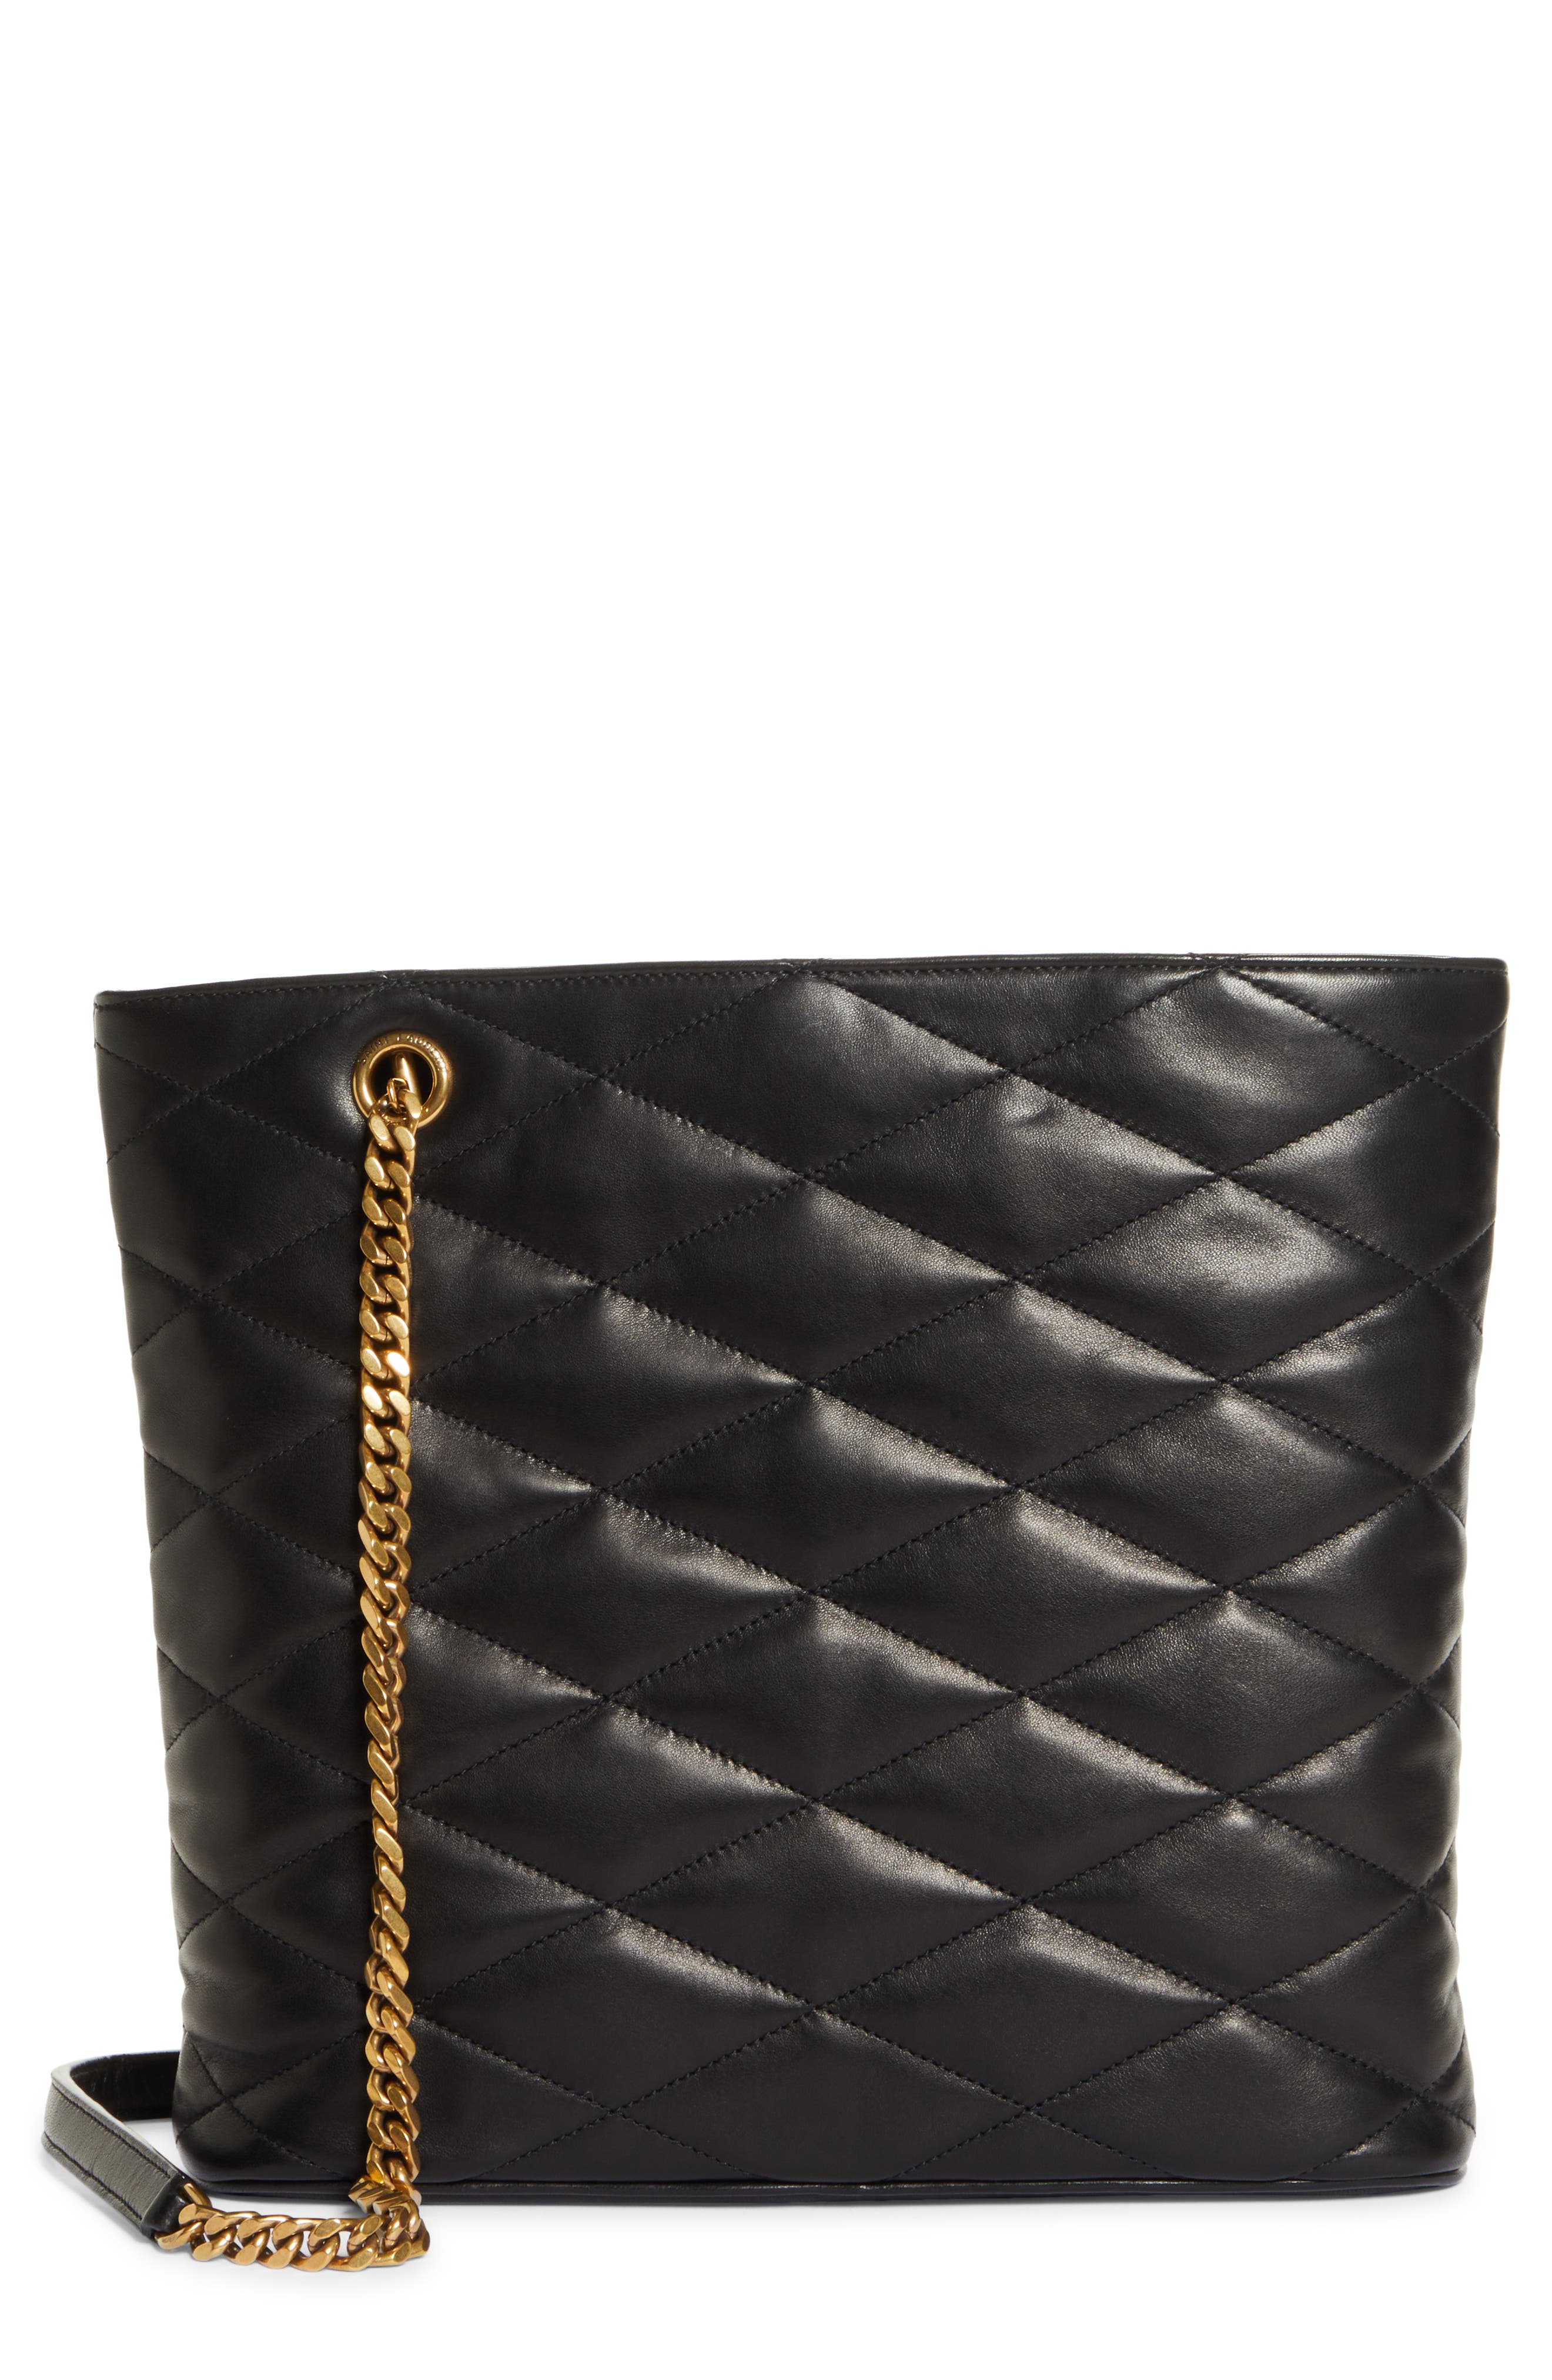 DKNY Women's Quilted Wallet on A Chain